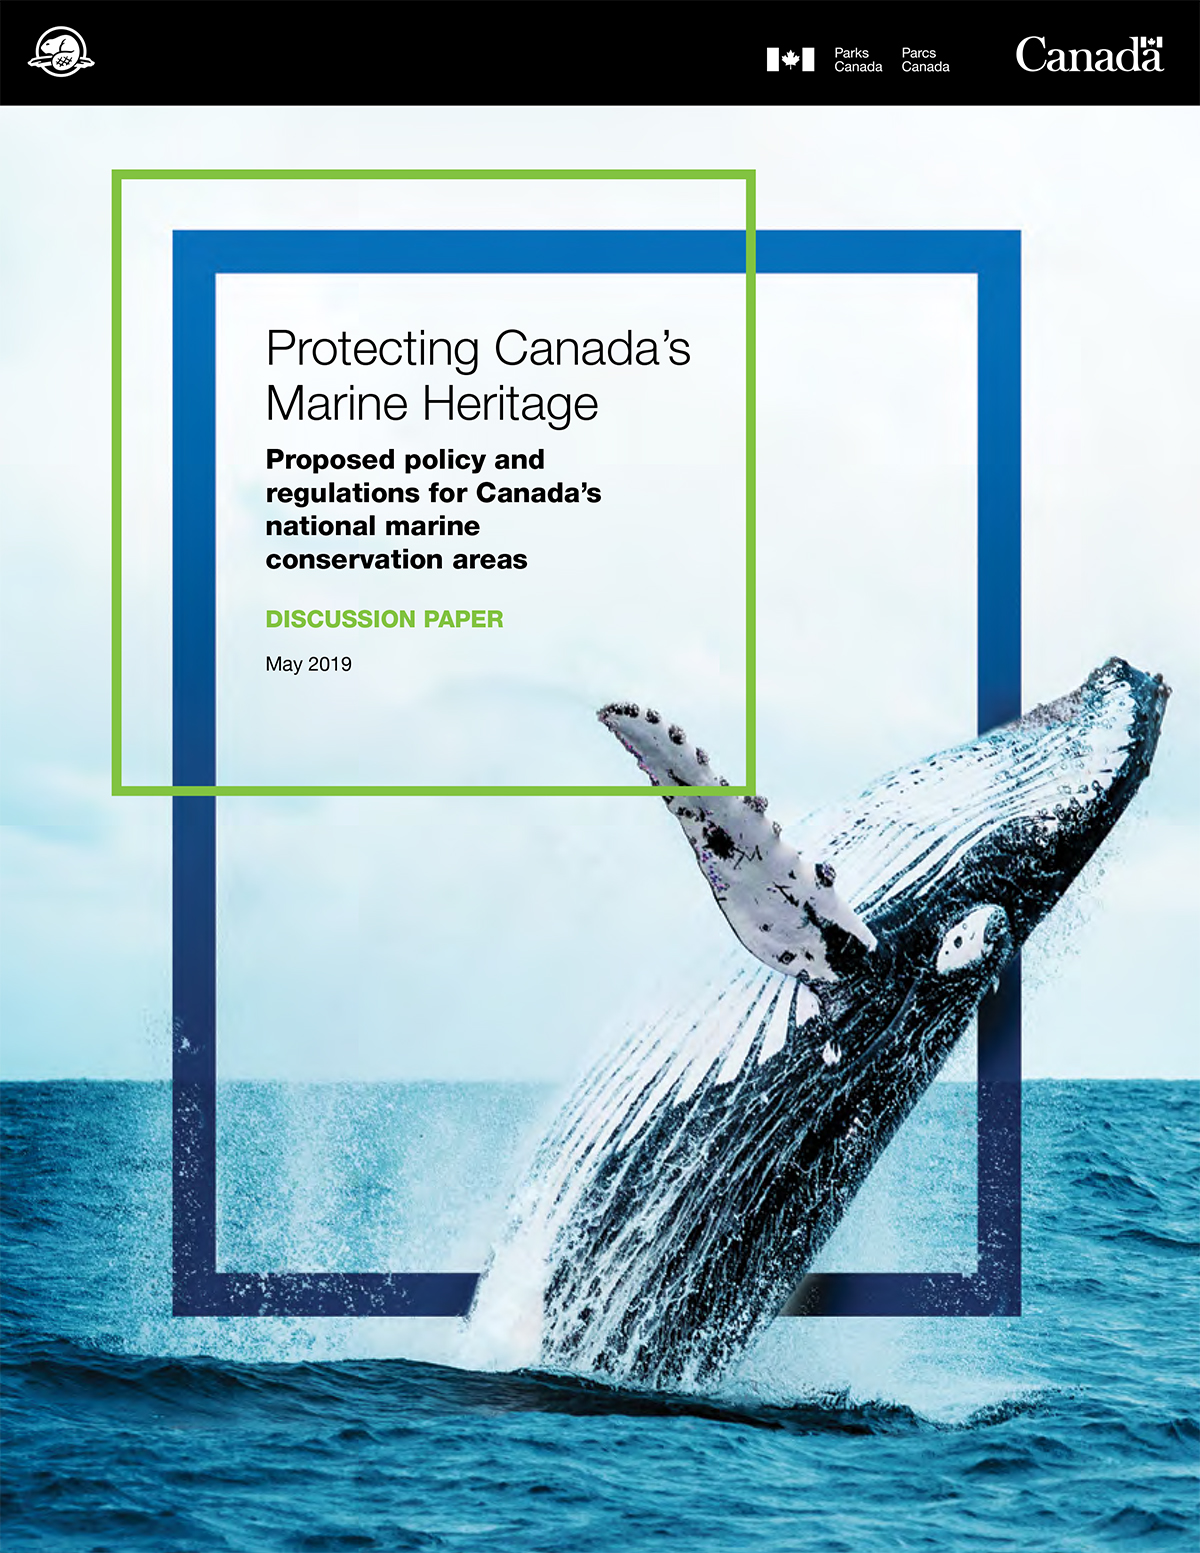 A whale breaching. Text: Protecting Canada's Marine Heritage - Proposed policy and regulations for Canada's conservation areas - Discussion paper - May 2019.